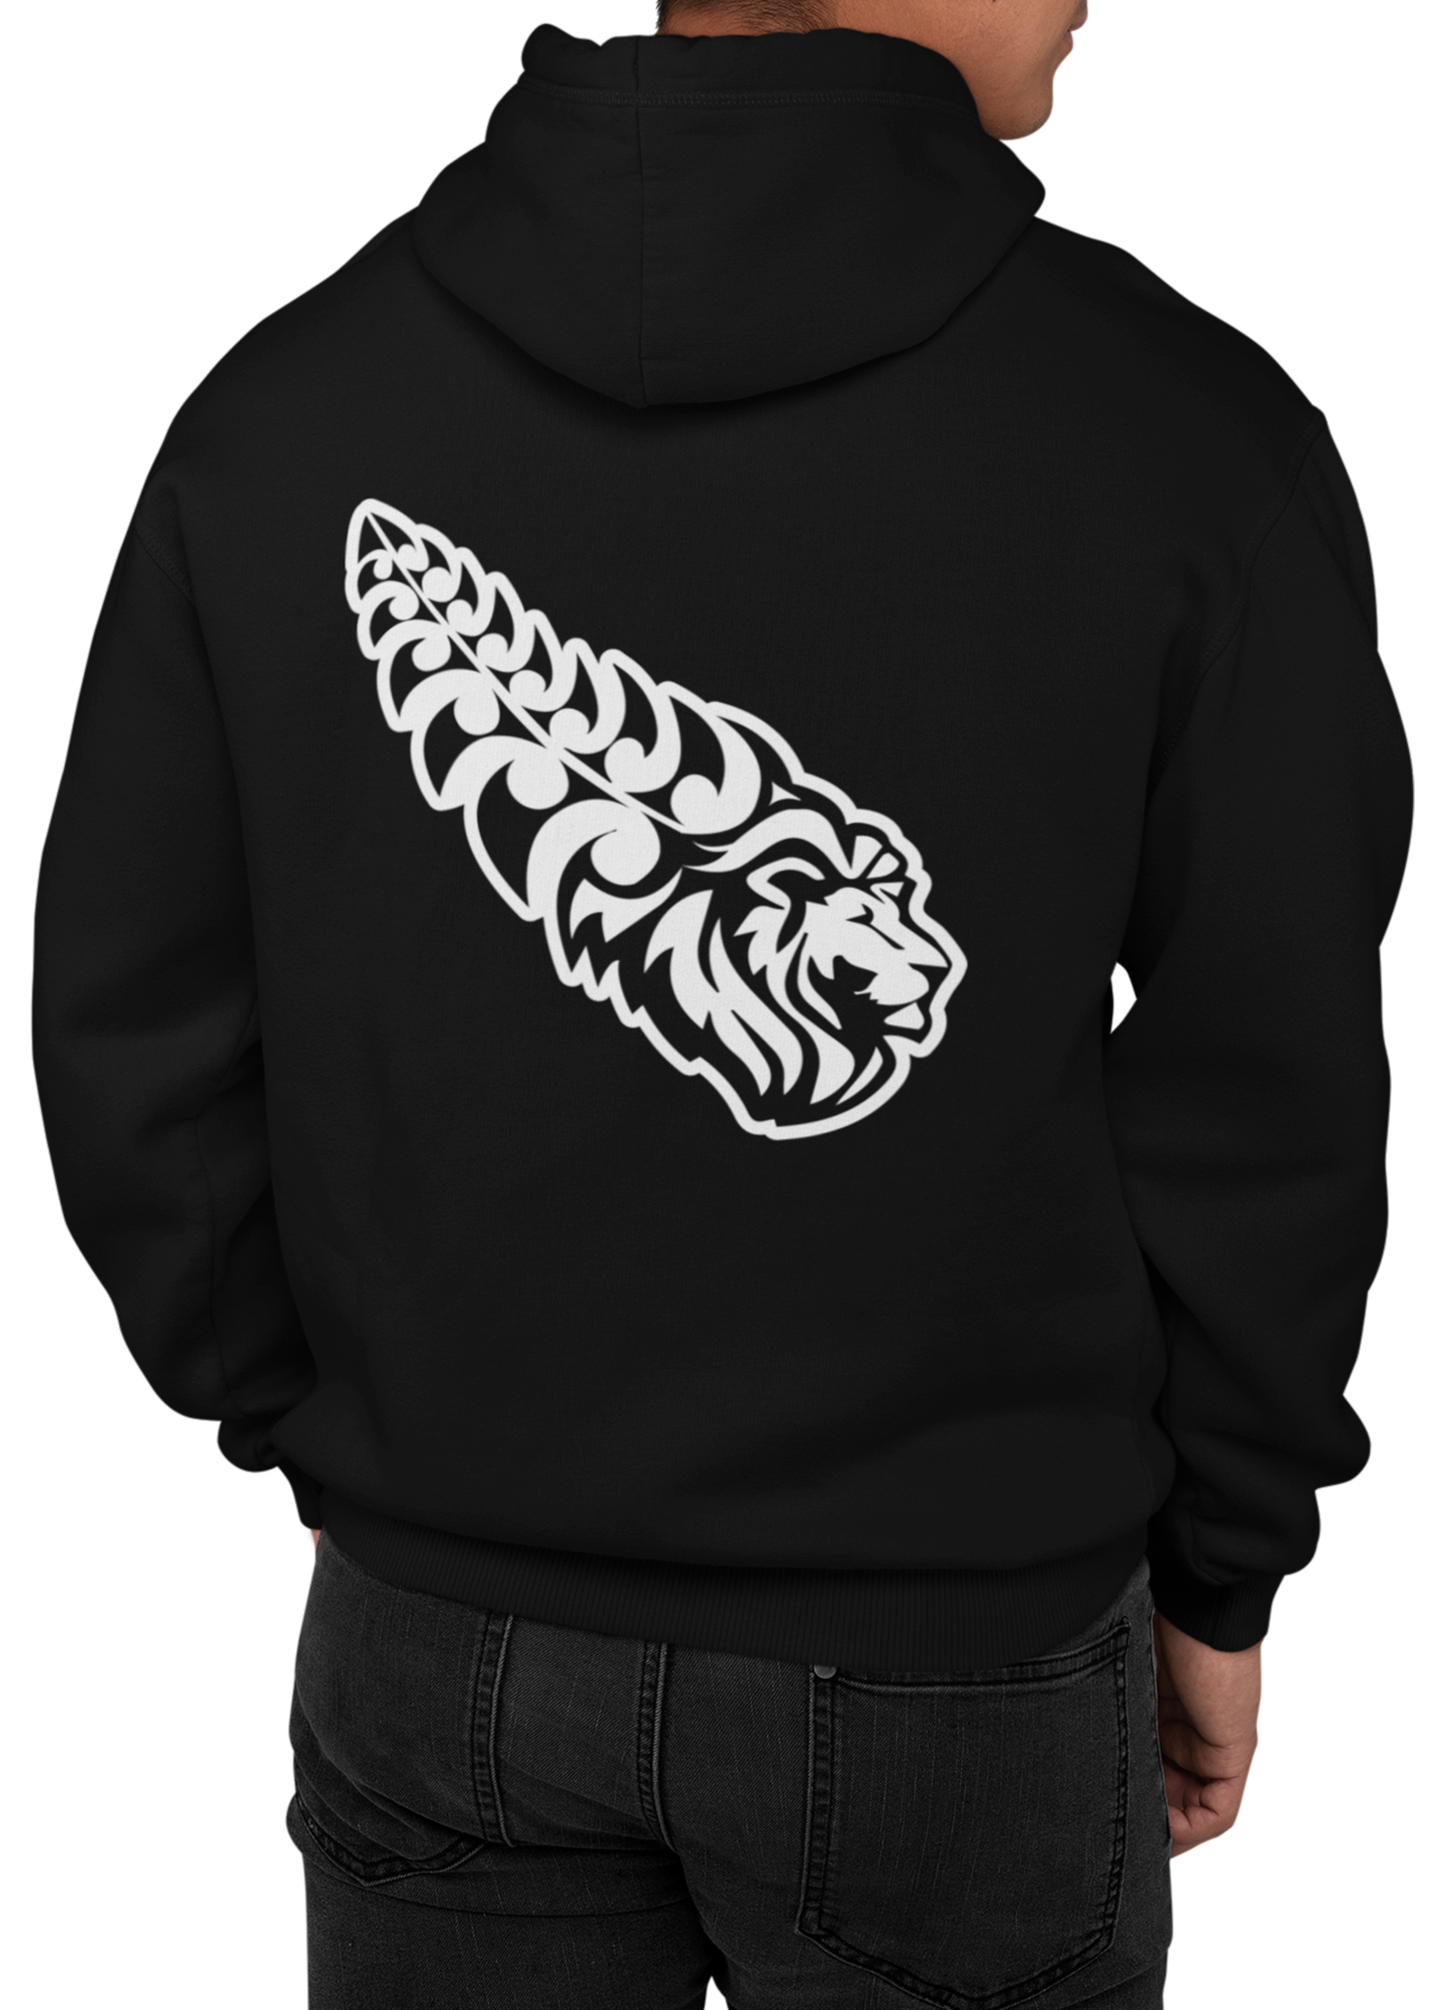 The Lion hoodie